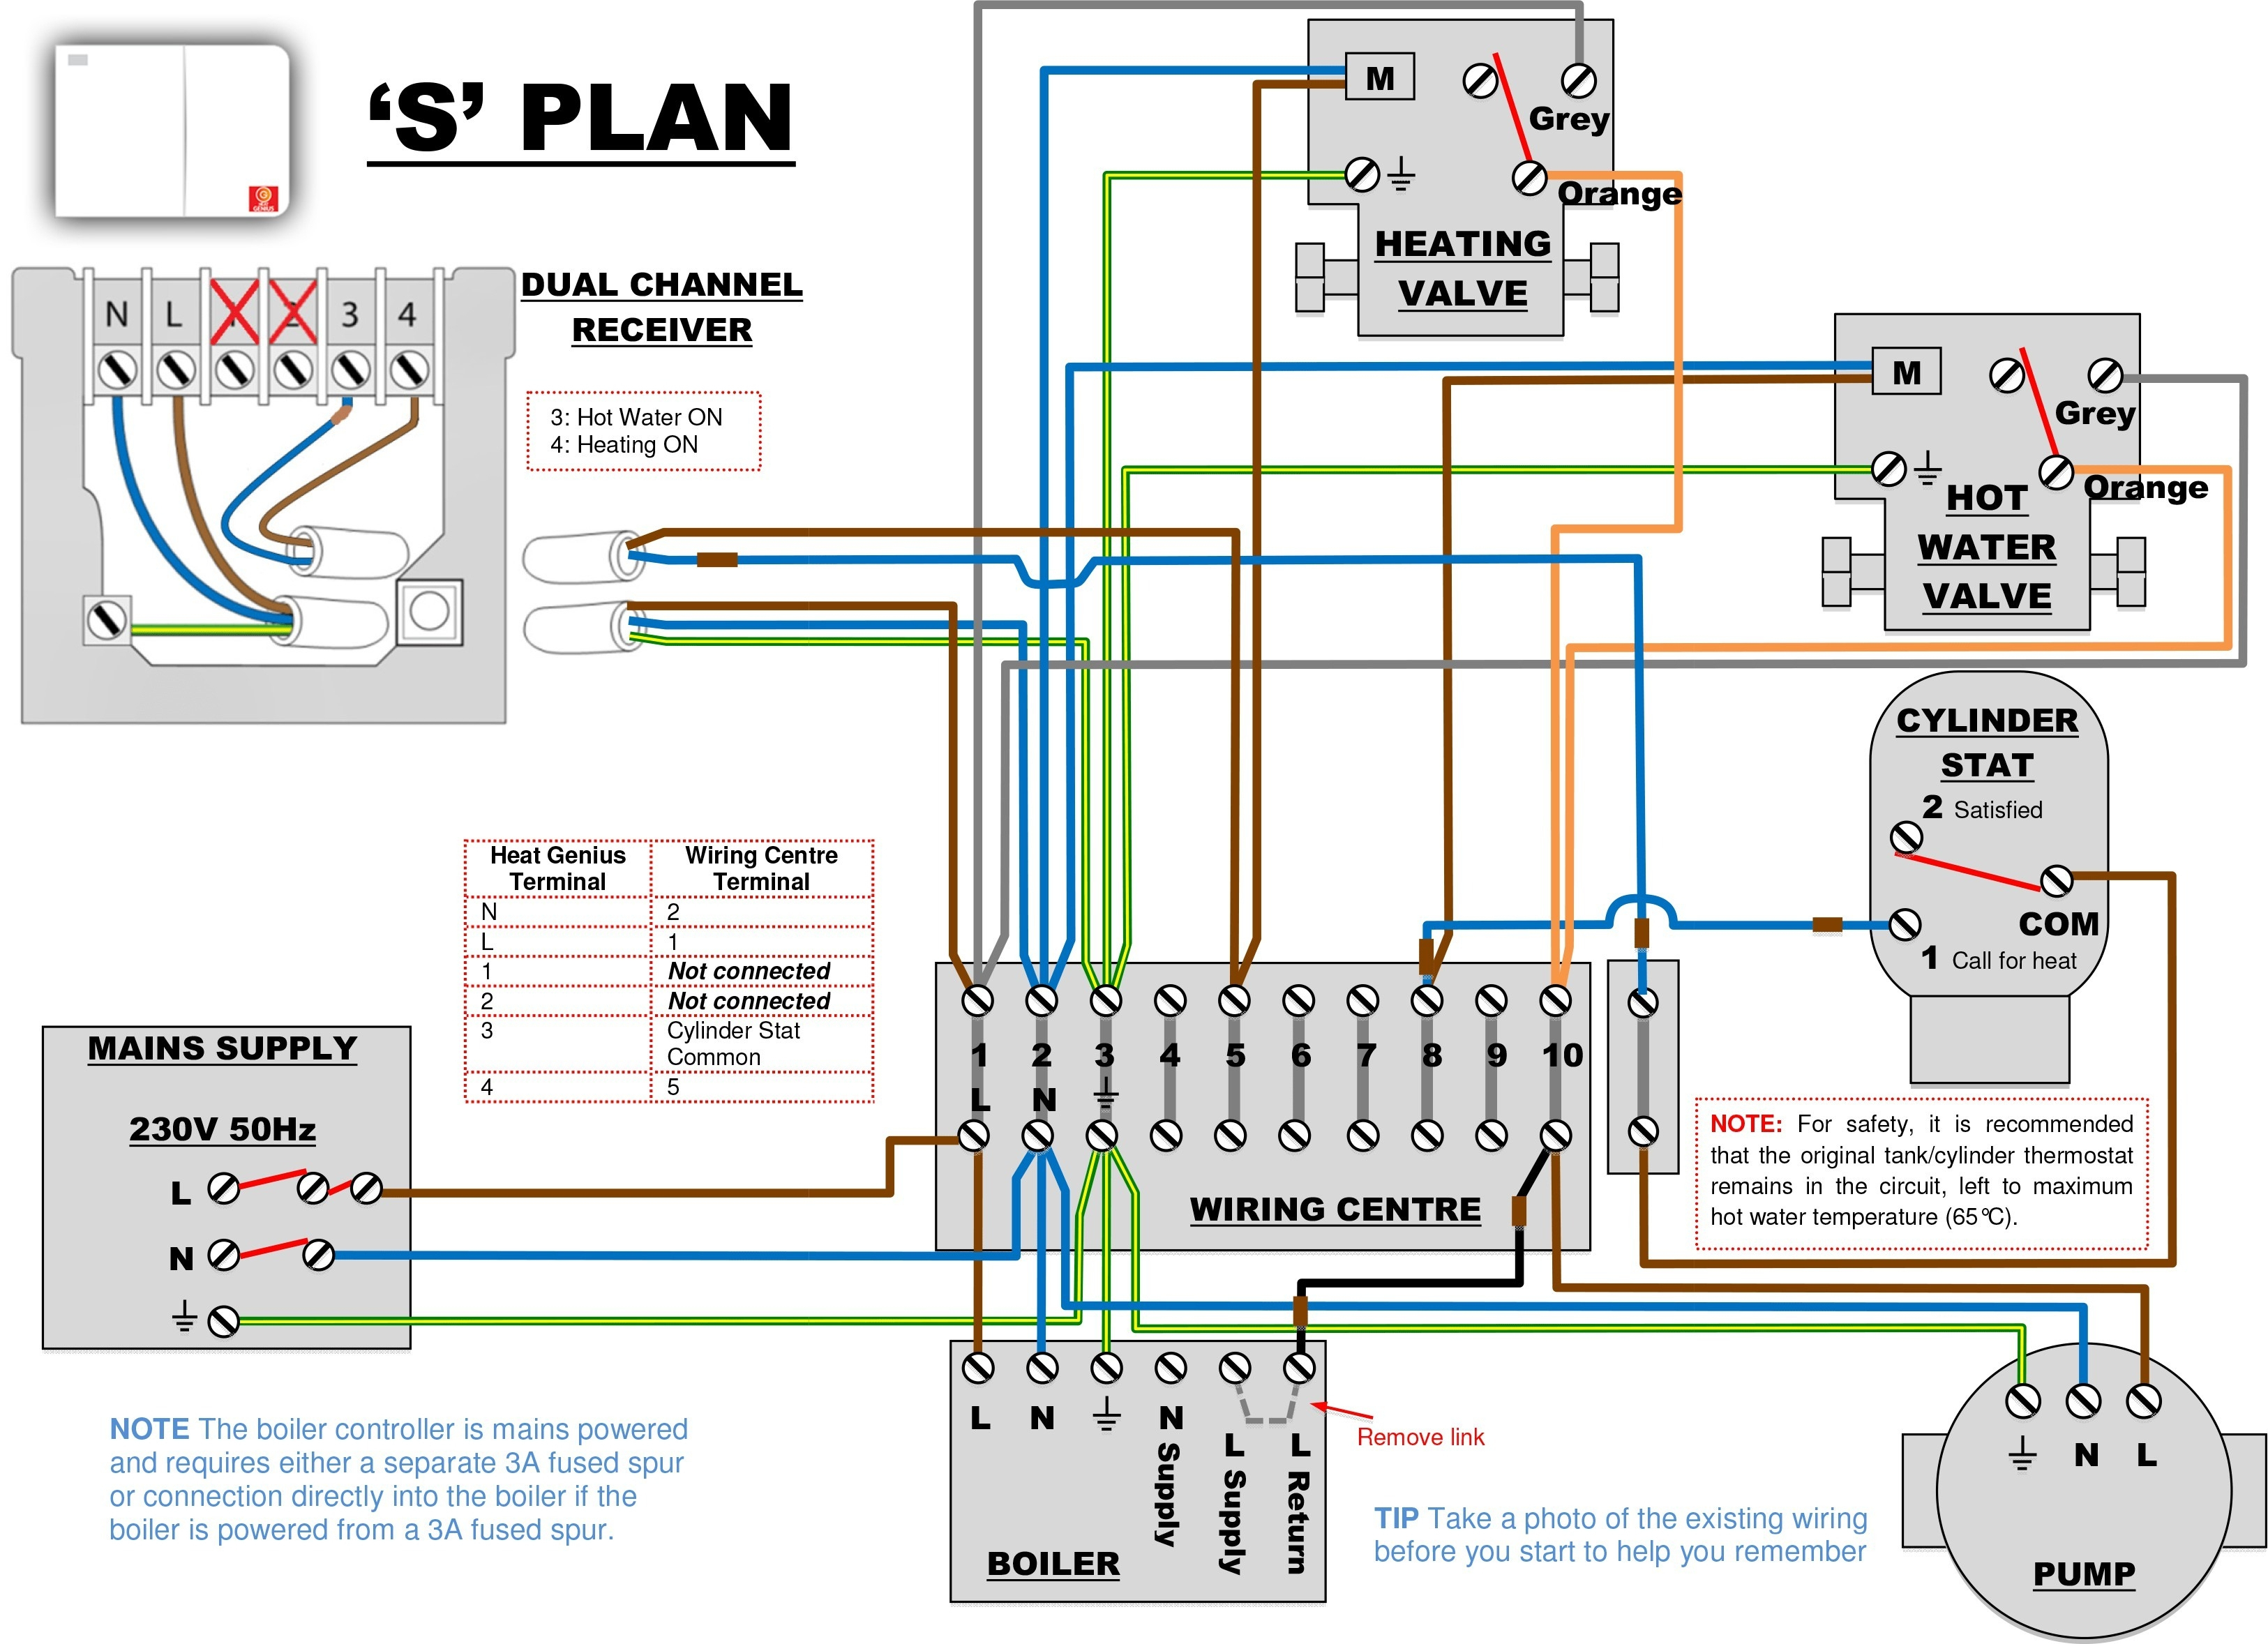 Carrier Infinity Thermostat Wiring | Wiring Diagram - Carrier Wiring Diagram